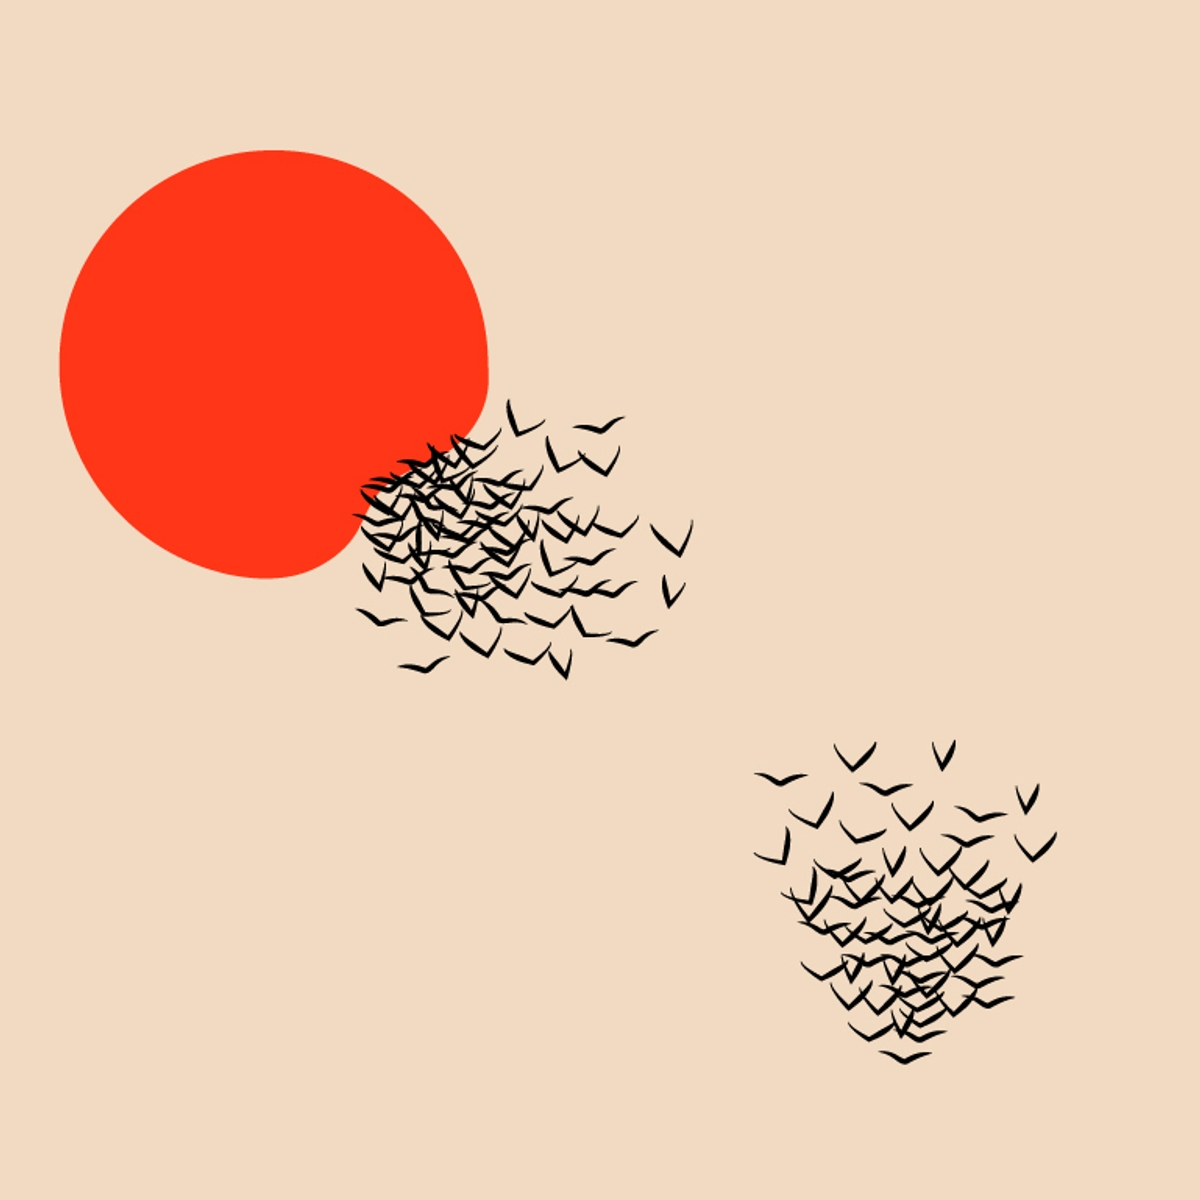 Illustration of the "Creatures" chapter depicting a red sun and flock of birds.